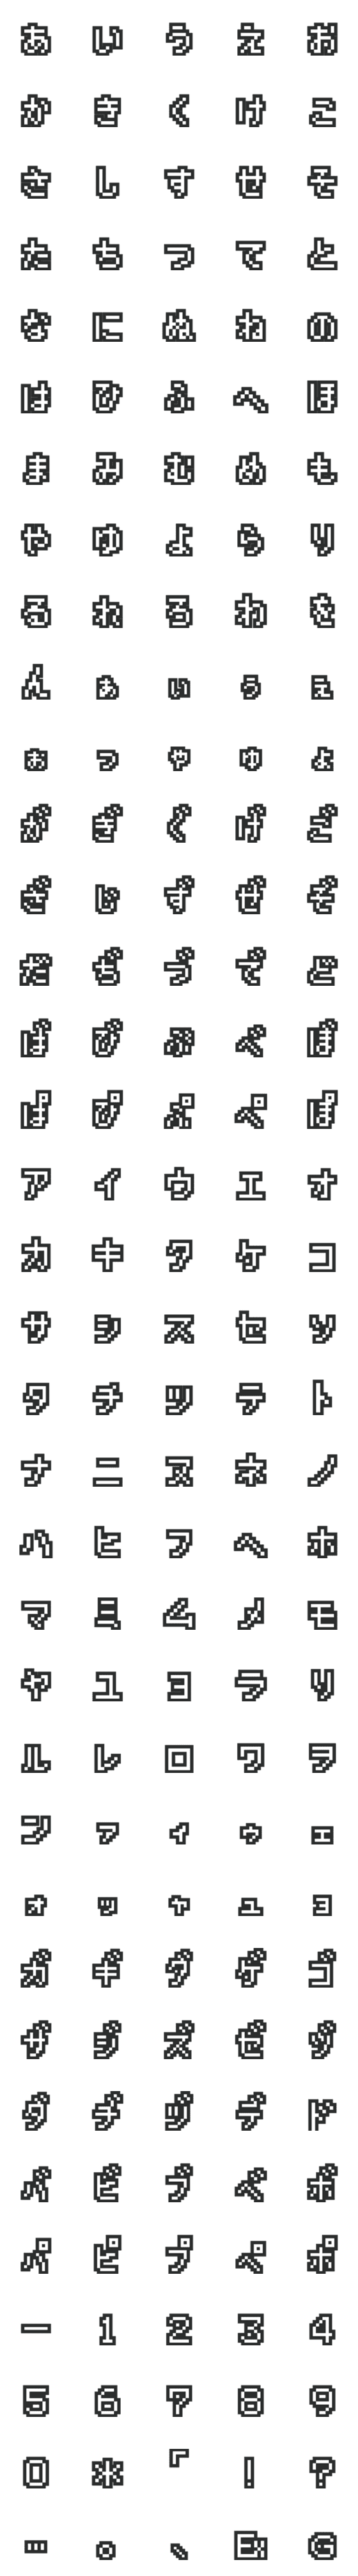 [LINE絵文字]レトロRPG風ドット絵文字（白）の画像一覧